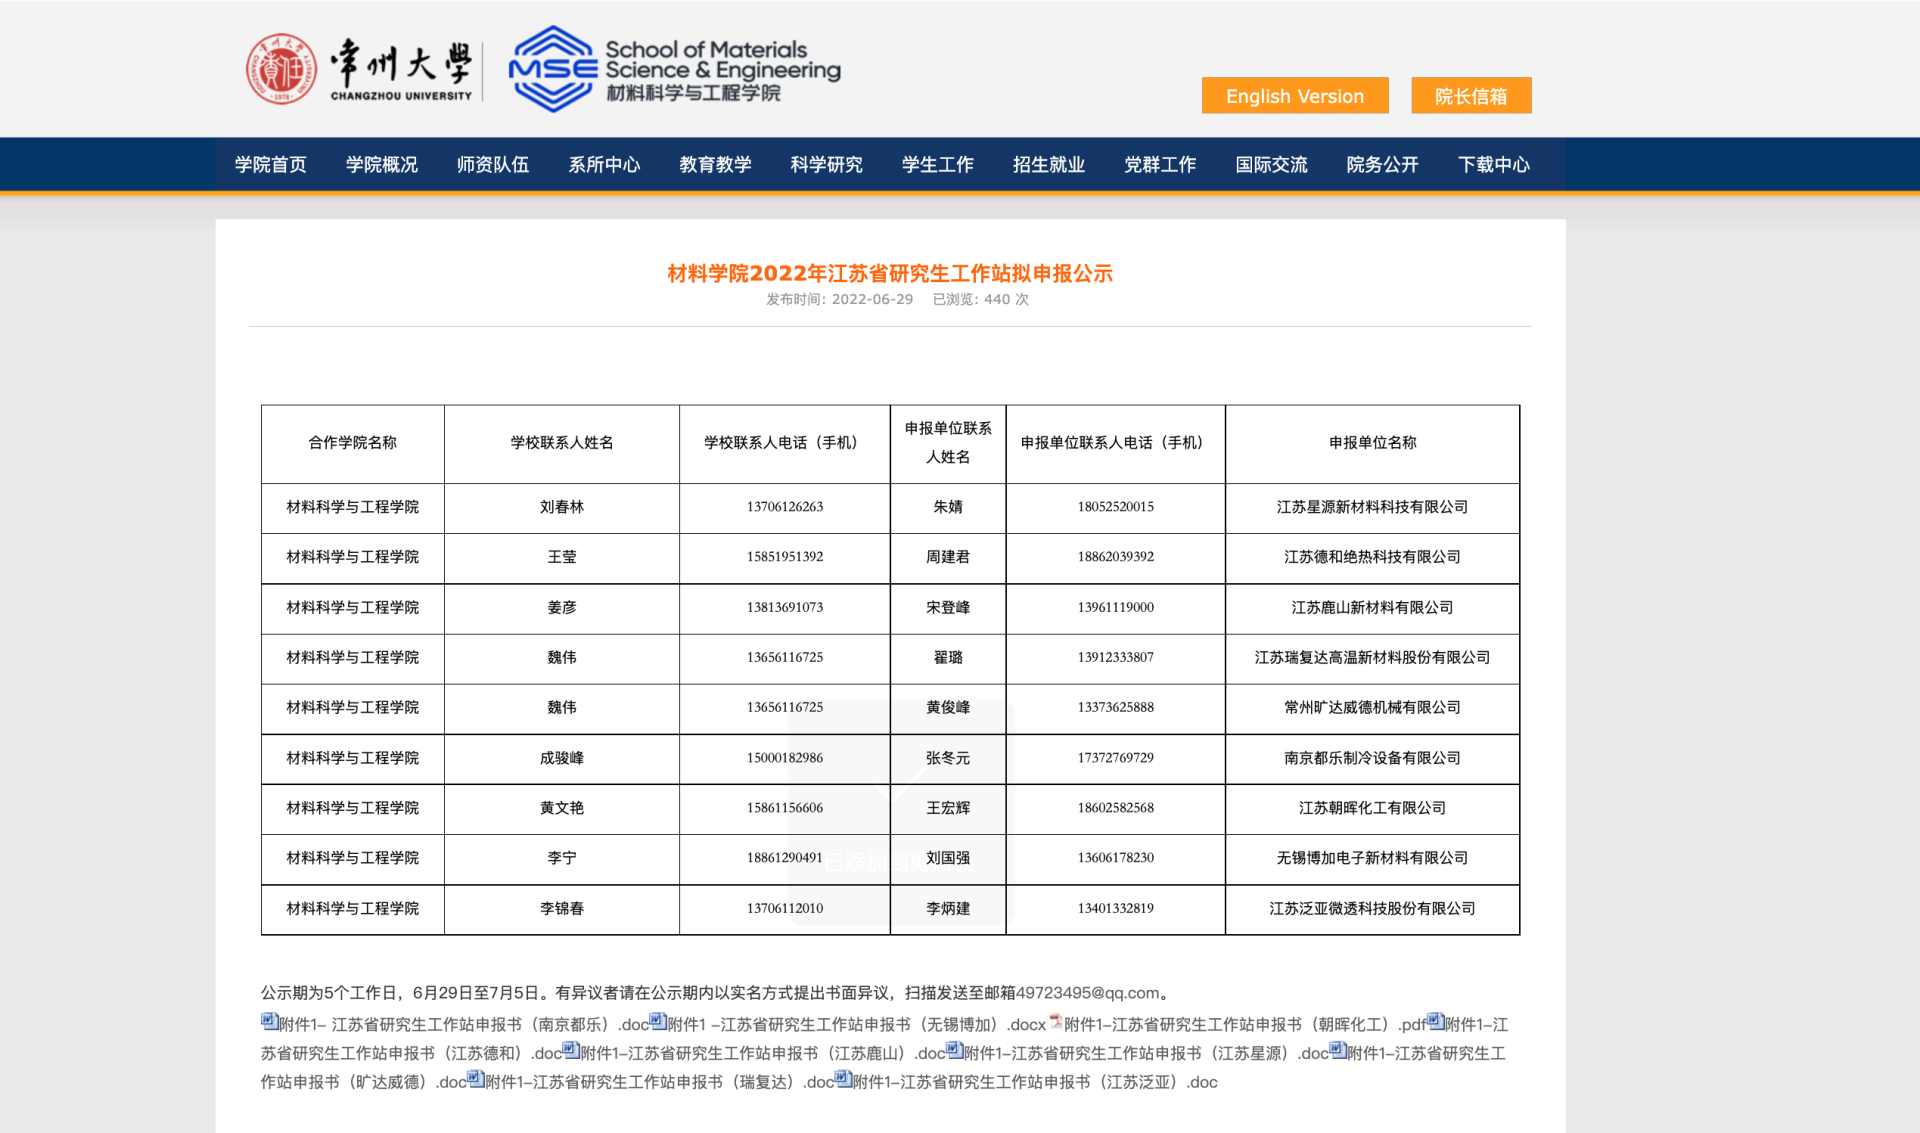 Changzhou University School of Materials Science intends to apply for public announcement of the 2022 Jiangsu Province Graduate Workstation